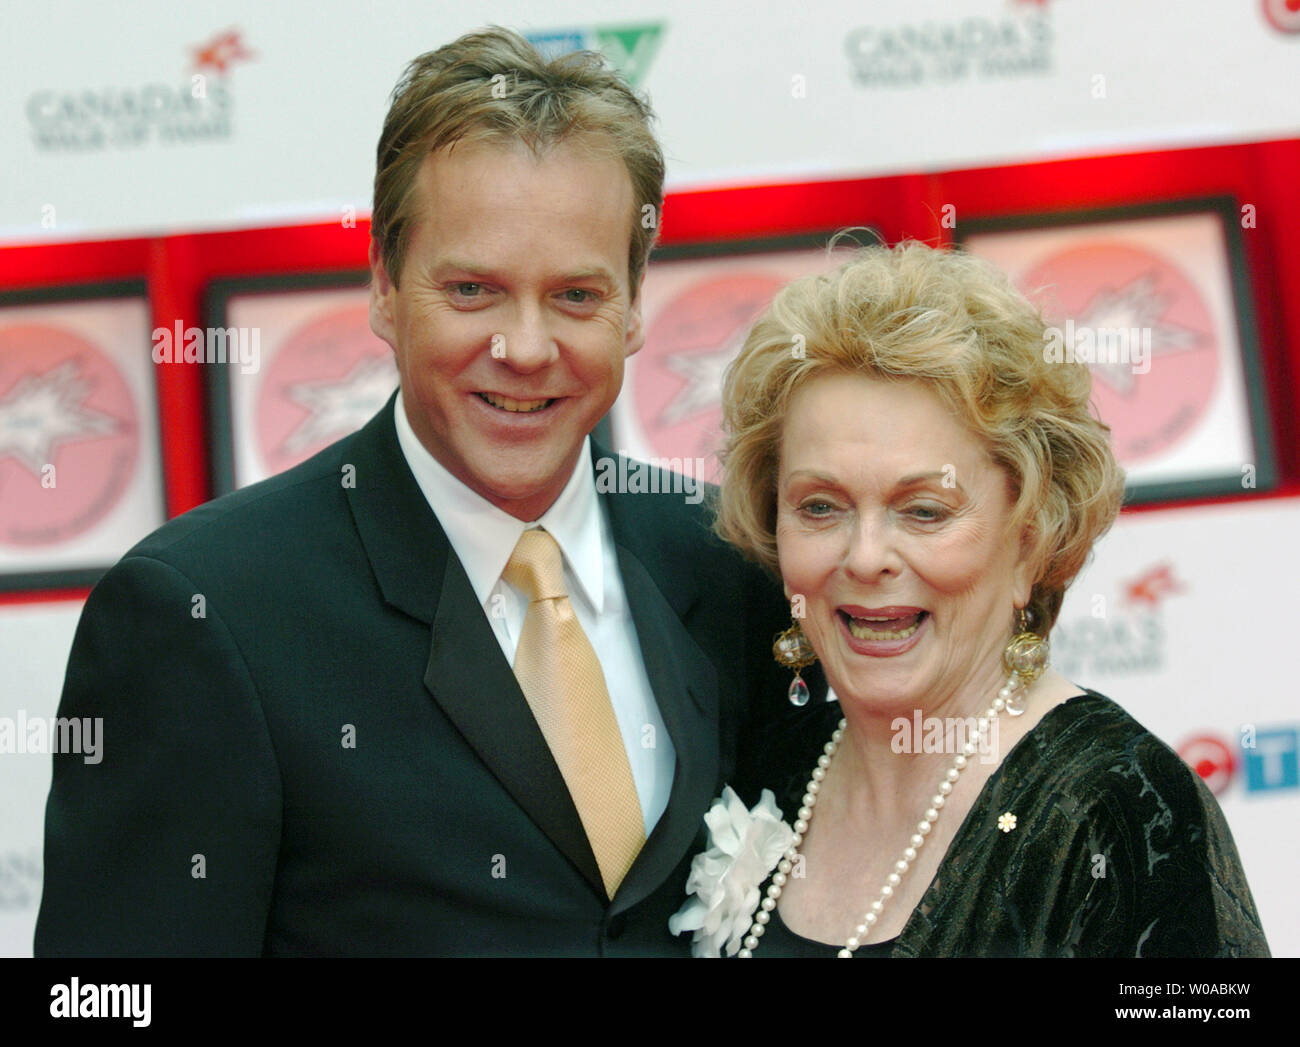 Kiefer Sutherland and his mother Shirley Douglas pose for photographers on the red carpet in front of the Elgin Theater after a star unveiling ceremony inducting Sutherland into Canada's Walk of Fame on June 5, 2005 in Toronto, Canada. Actors Douglas and Kiefer's father, Donald Sutherland, also have their own stars on the Walk of Fame, having been inducted in 2004 and 2000 respectively. (UPI Photo/Christine Chew) Stock Photo